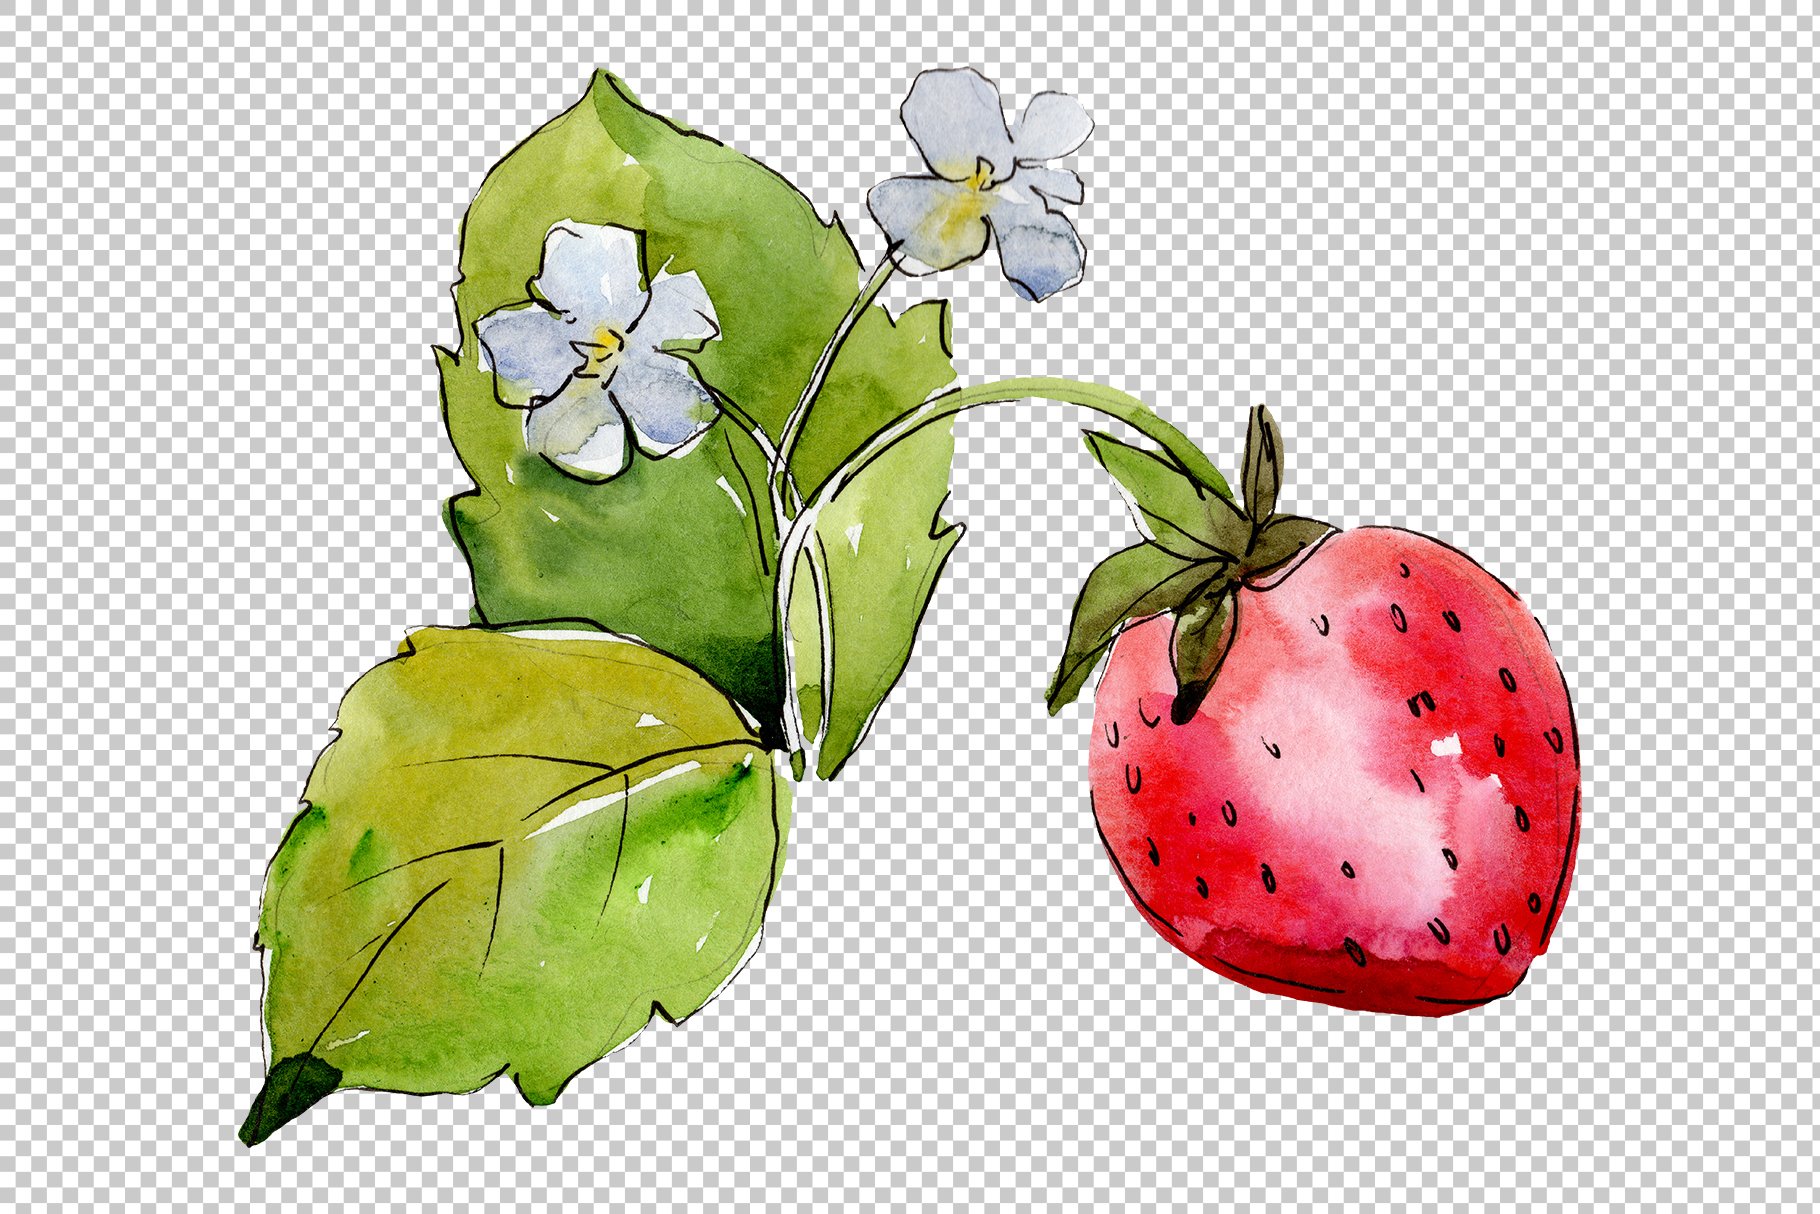 Cute strawberry illustration on a transparent background.